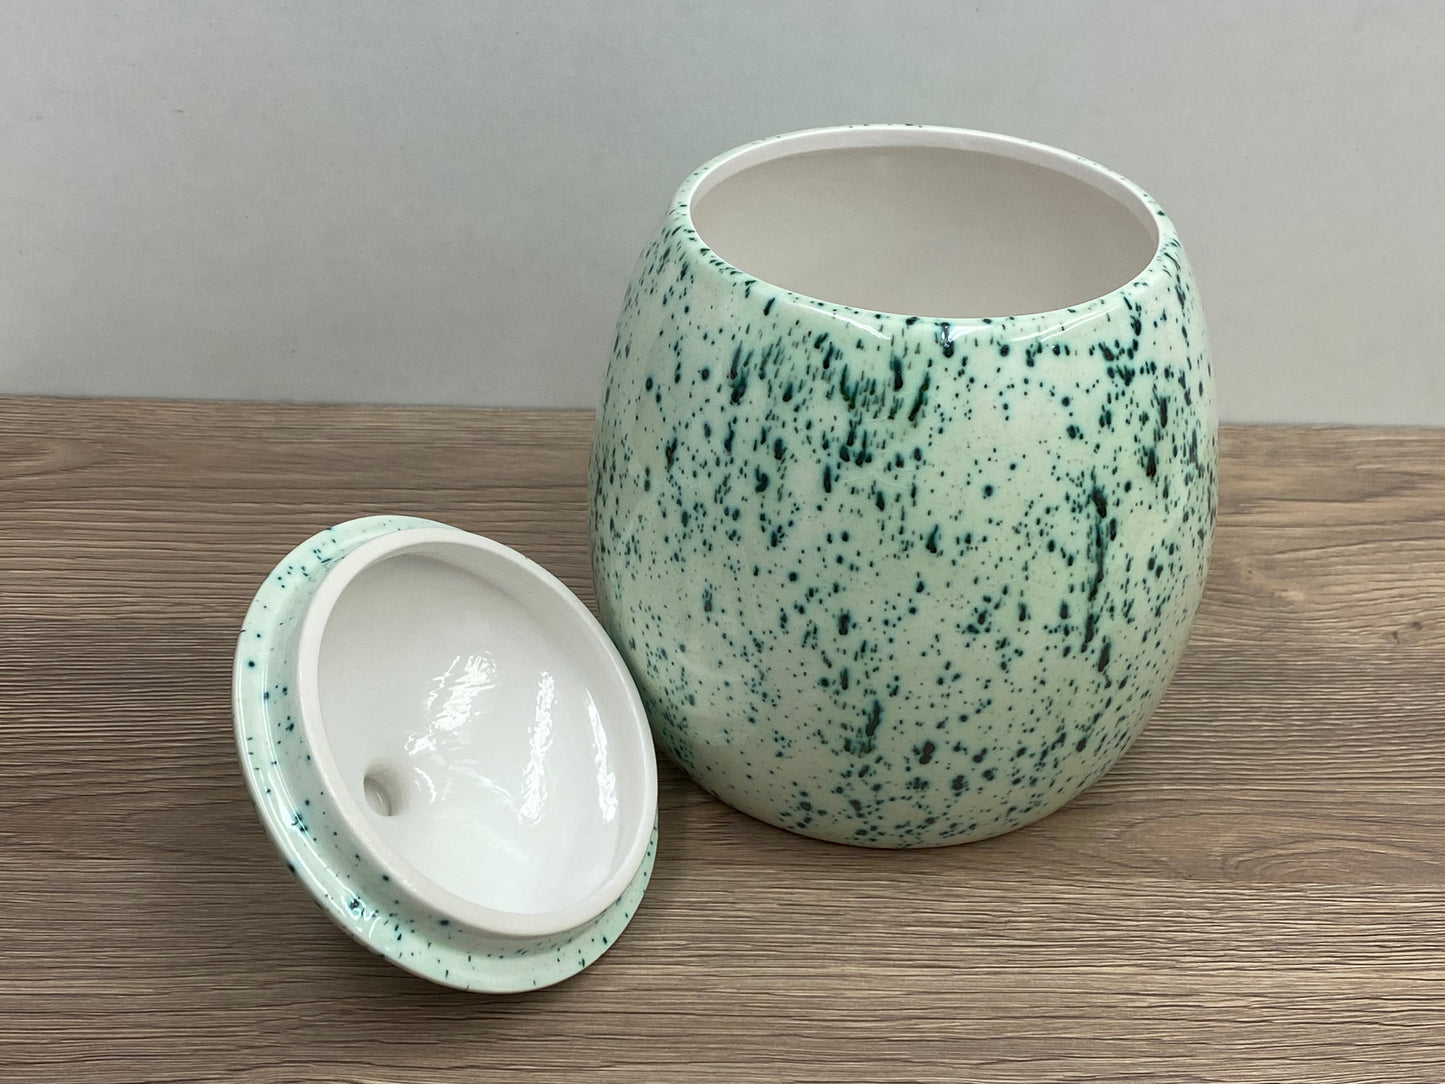 Cookie/Biscuit Jar Canister Speckled Green